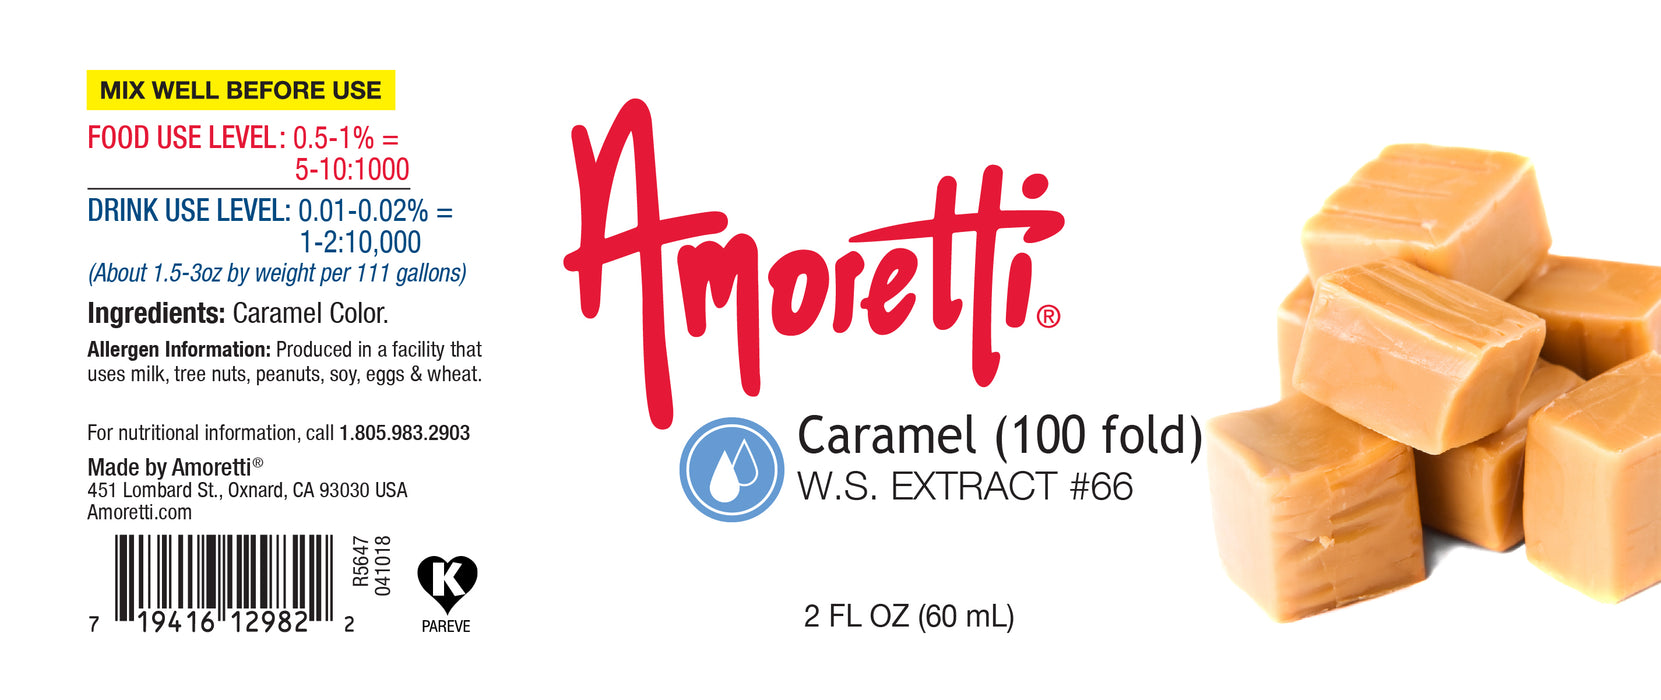 Caramel Extract Water Soluble (100 fold)